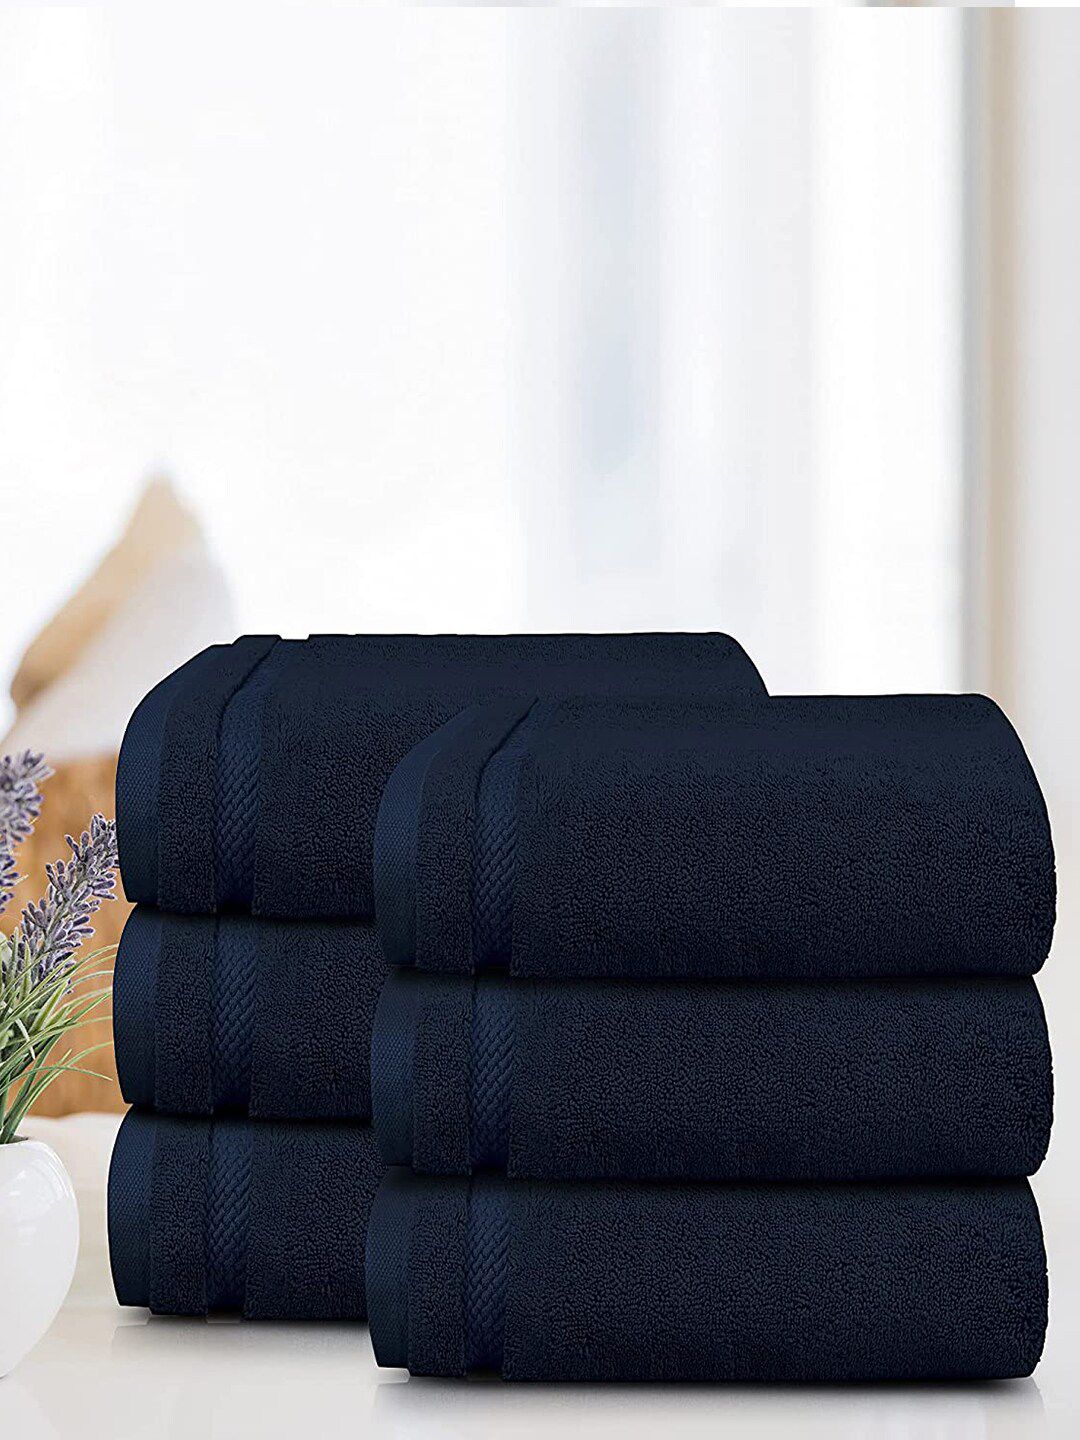 Trident 6 Piece Face Towel Set Navy Blue Luxury Collection 100% Cotton 625 GSM Price in India